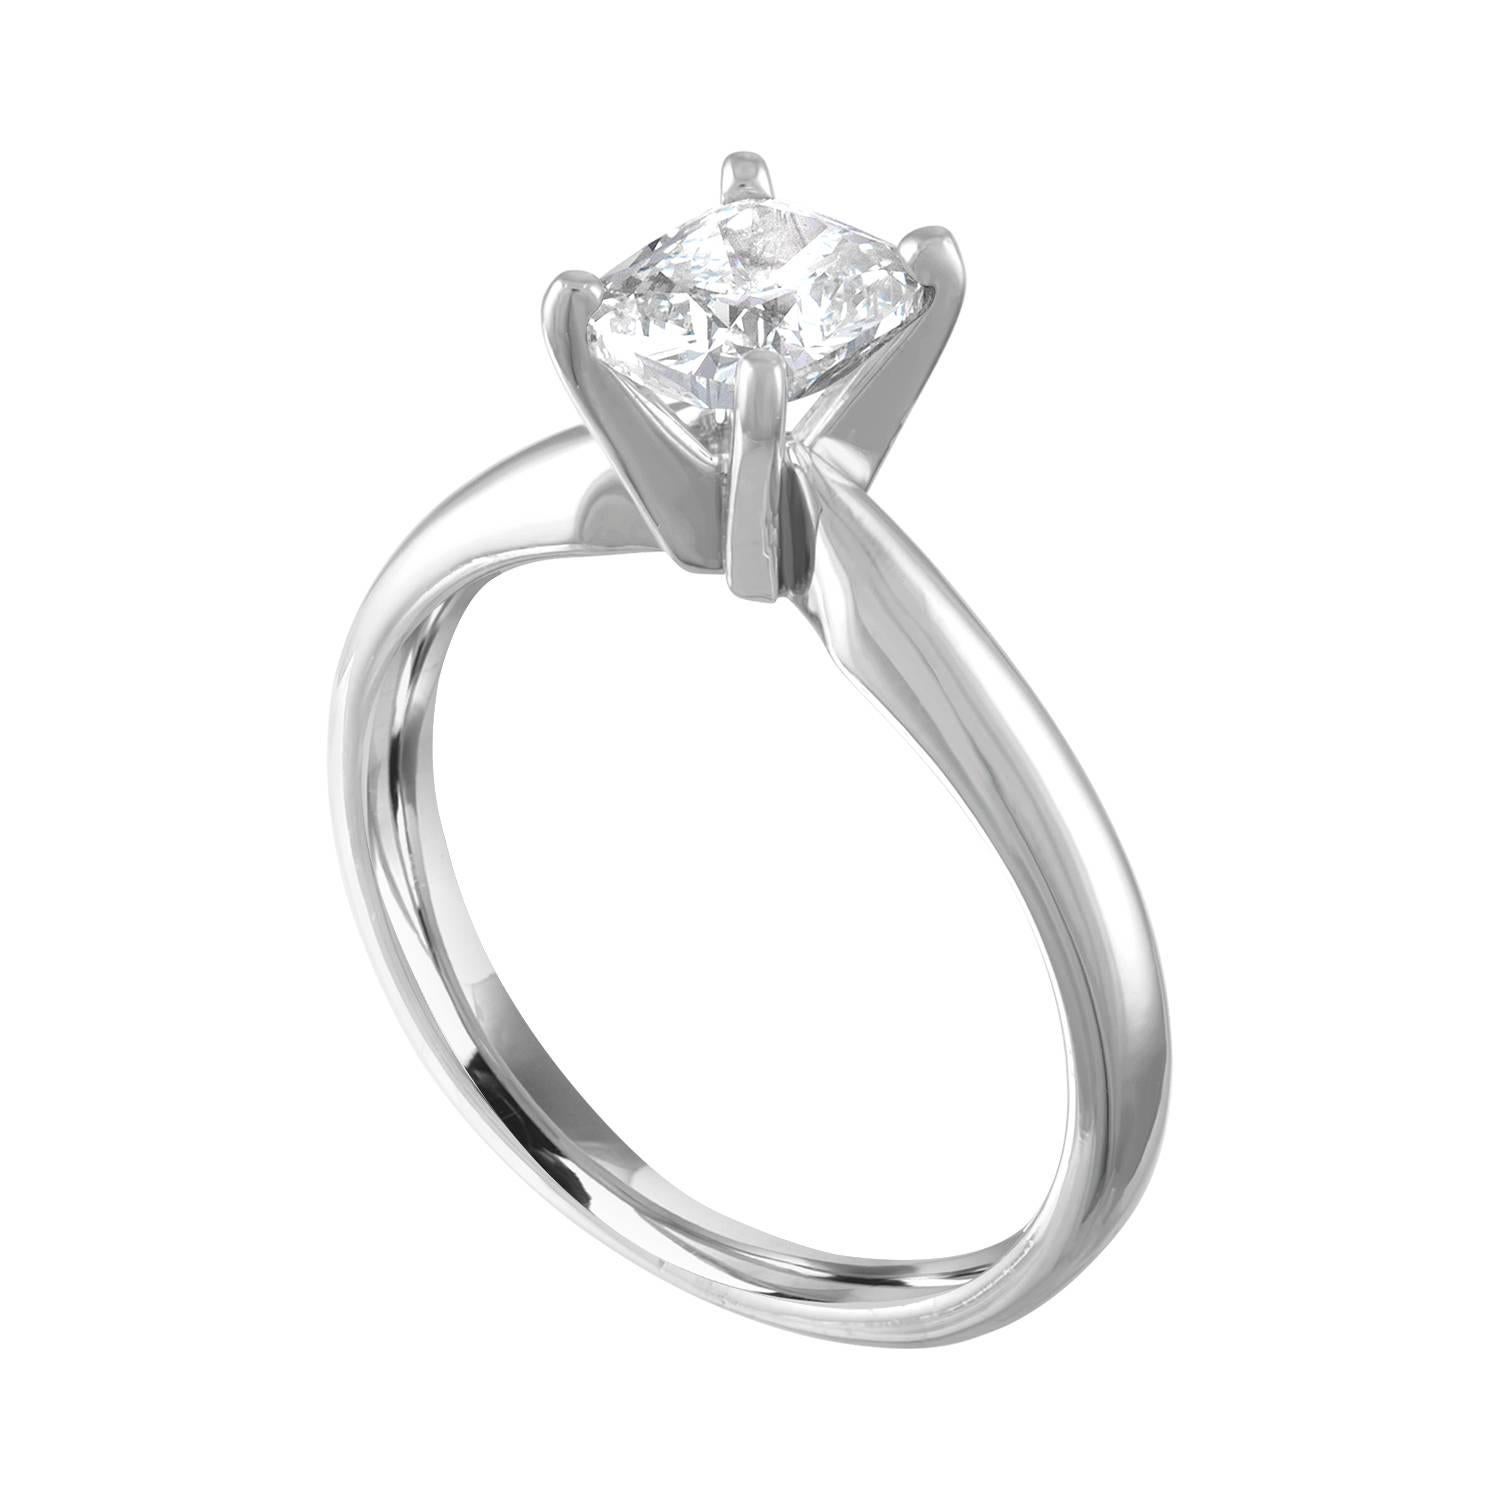 Solitaire Engagement Ring.
The ring is Platinum 950.
The Diamond is Cushion Cut, GIA Certified 0.79Ct H VS1.
The ring is a size 5.00, sizable.
The ring weighs 4.3 grams.